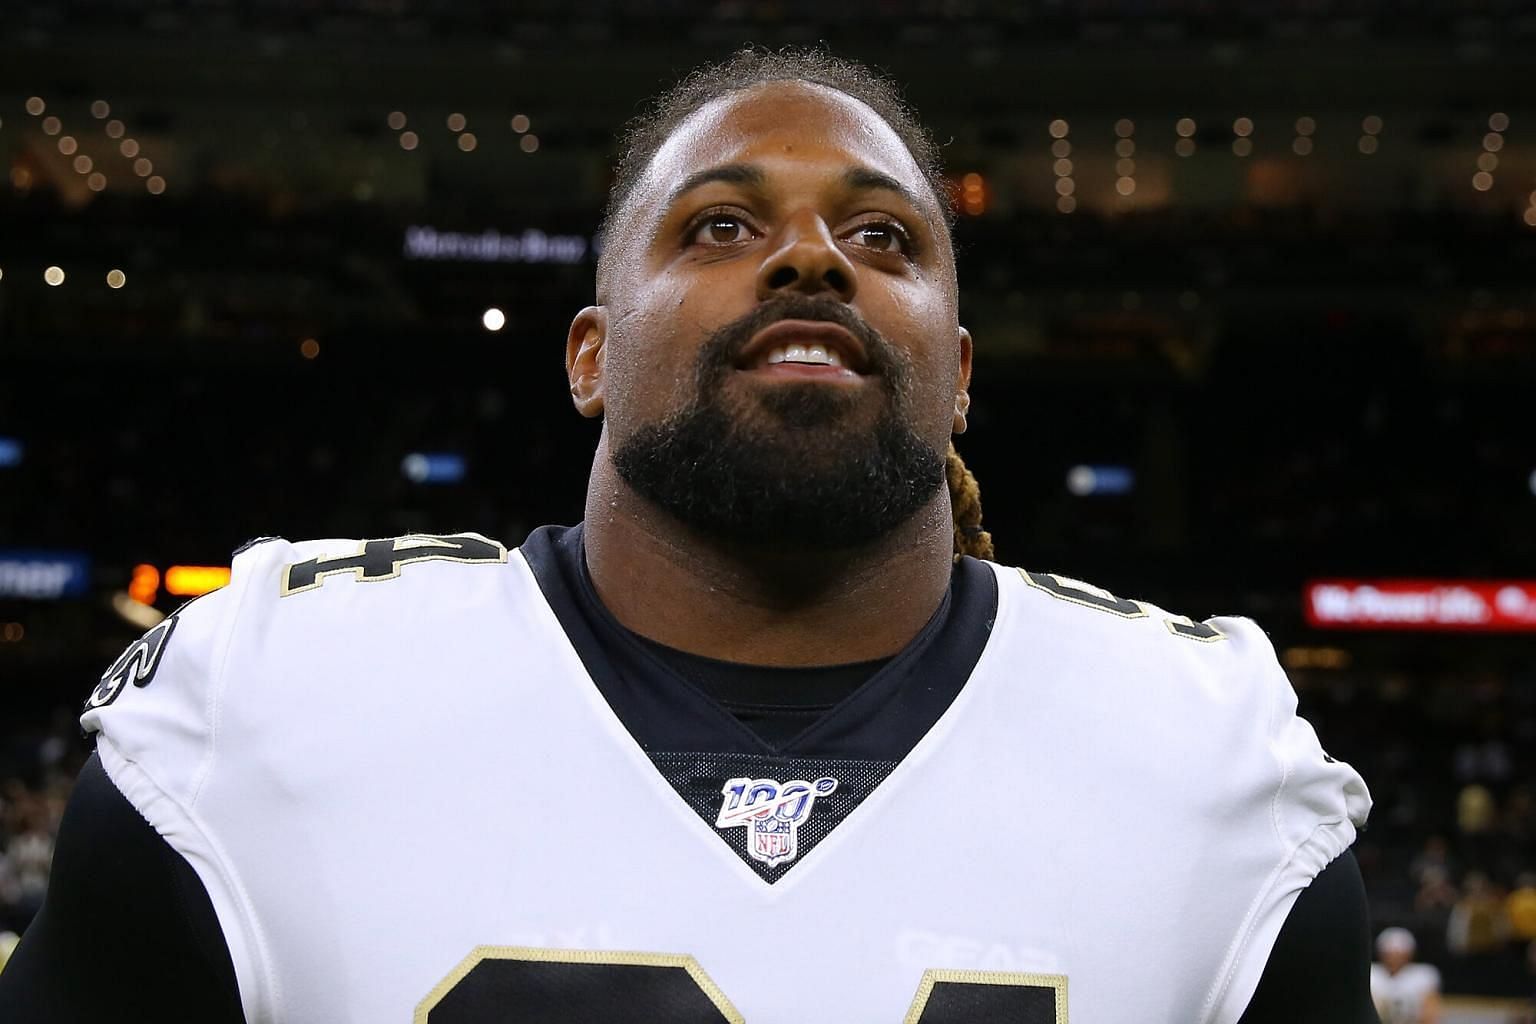 Cameron Jordan is one of the longest-serving players on the Saints roster